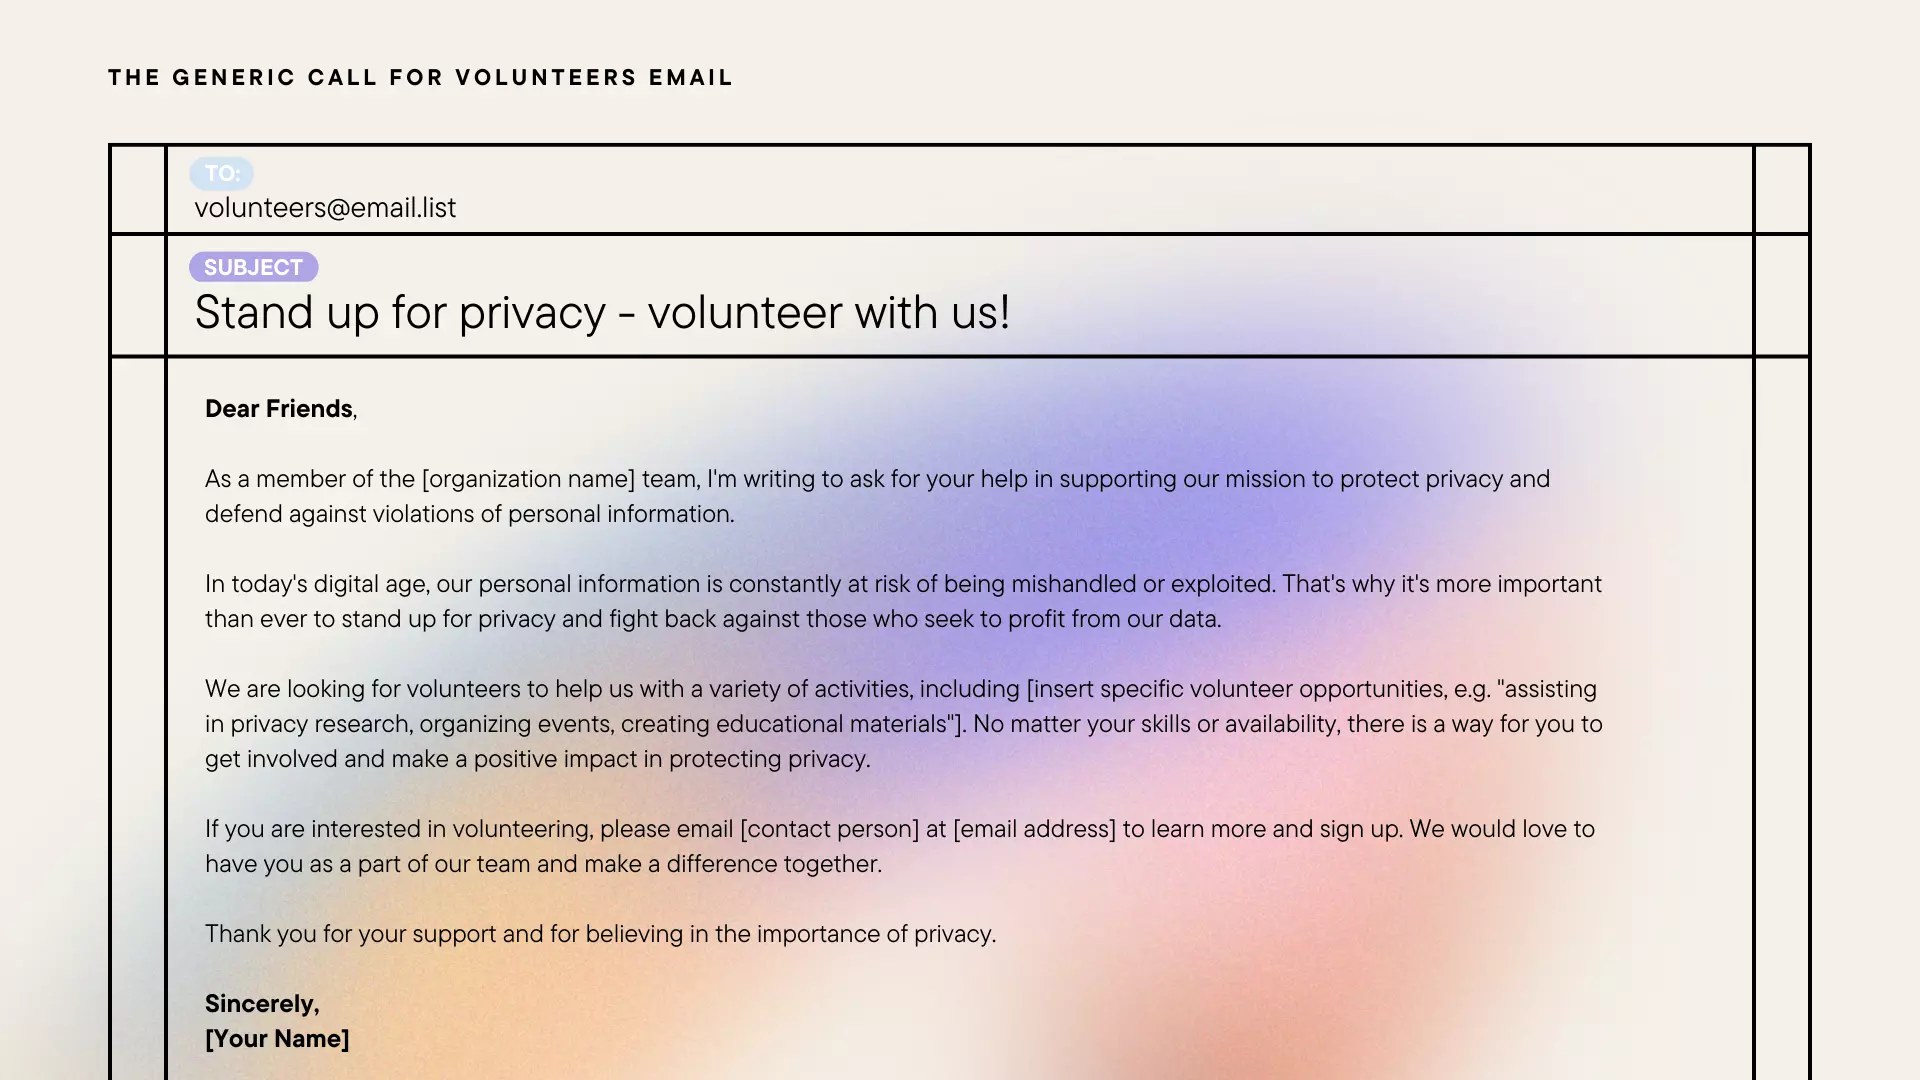 A generic call for volunteers email